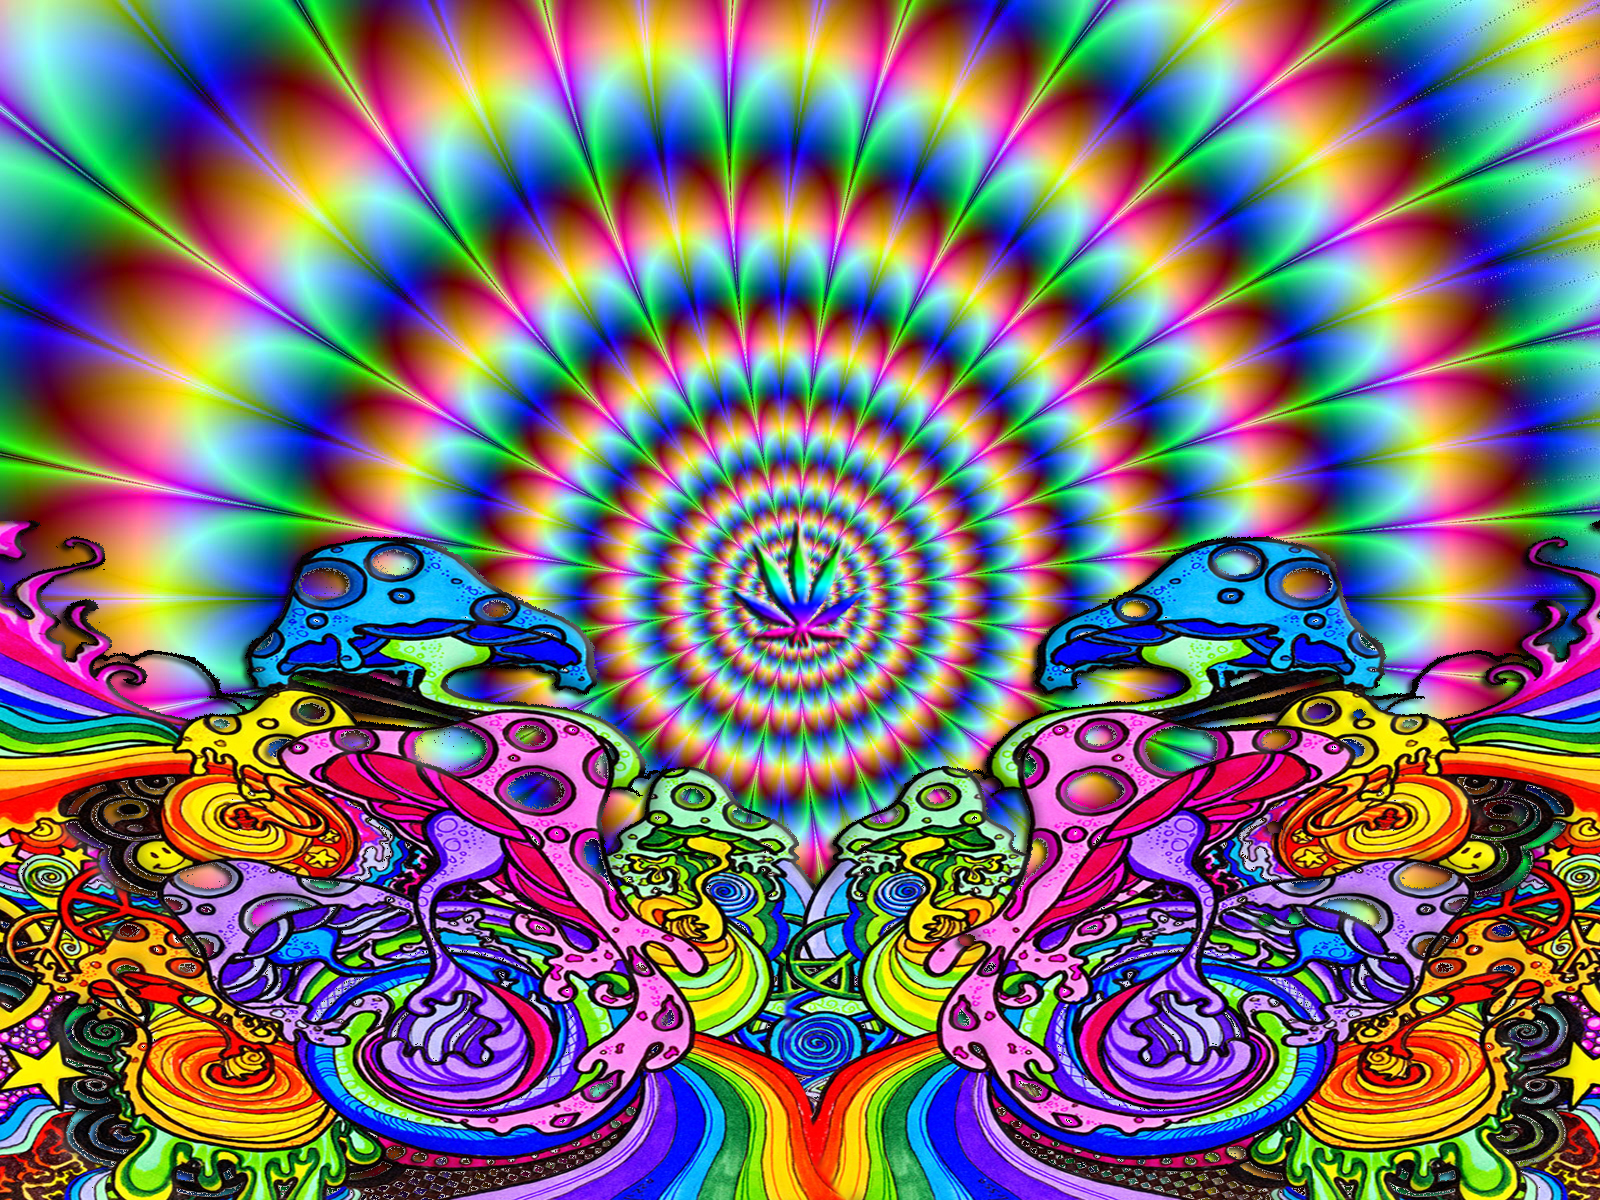 522 Psychedelic HD Wallpapers Backgrounds - Wallpaper Abyss